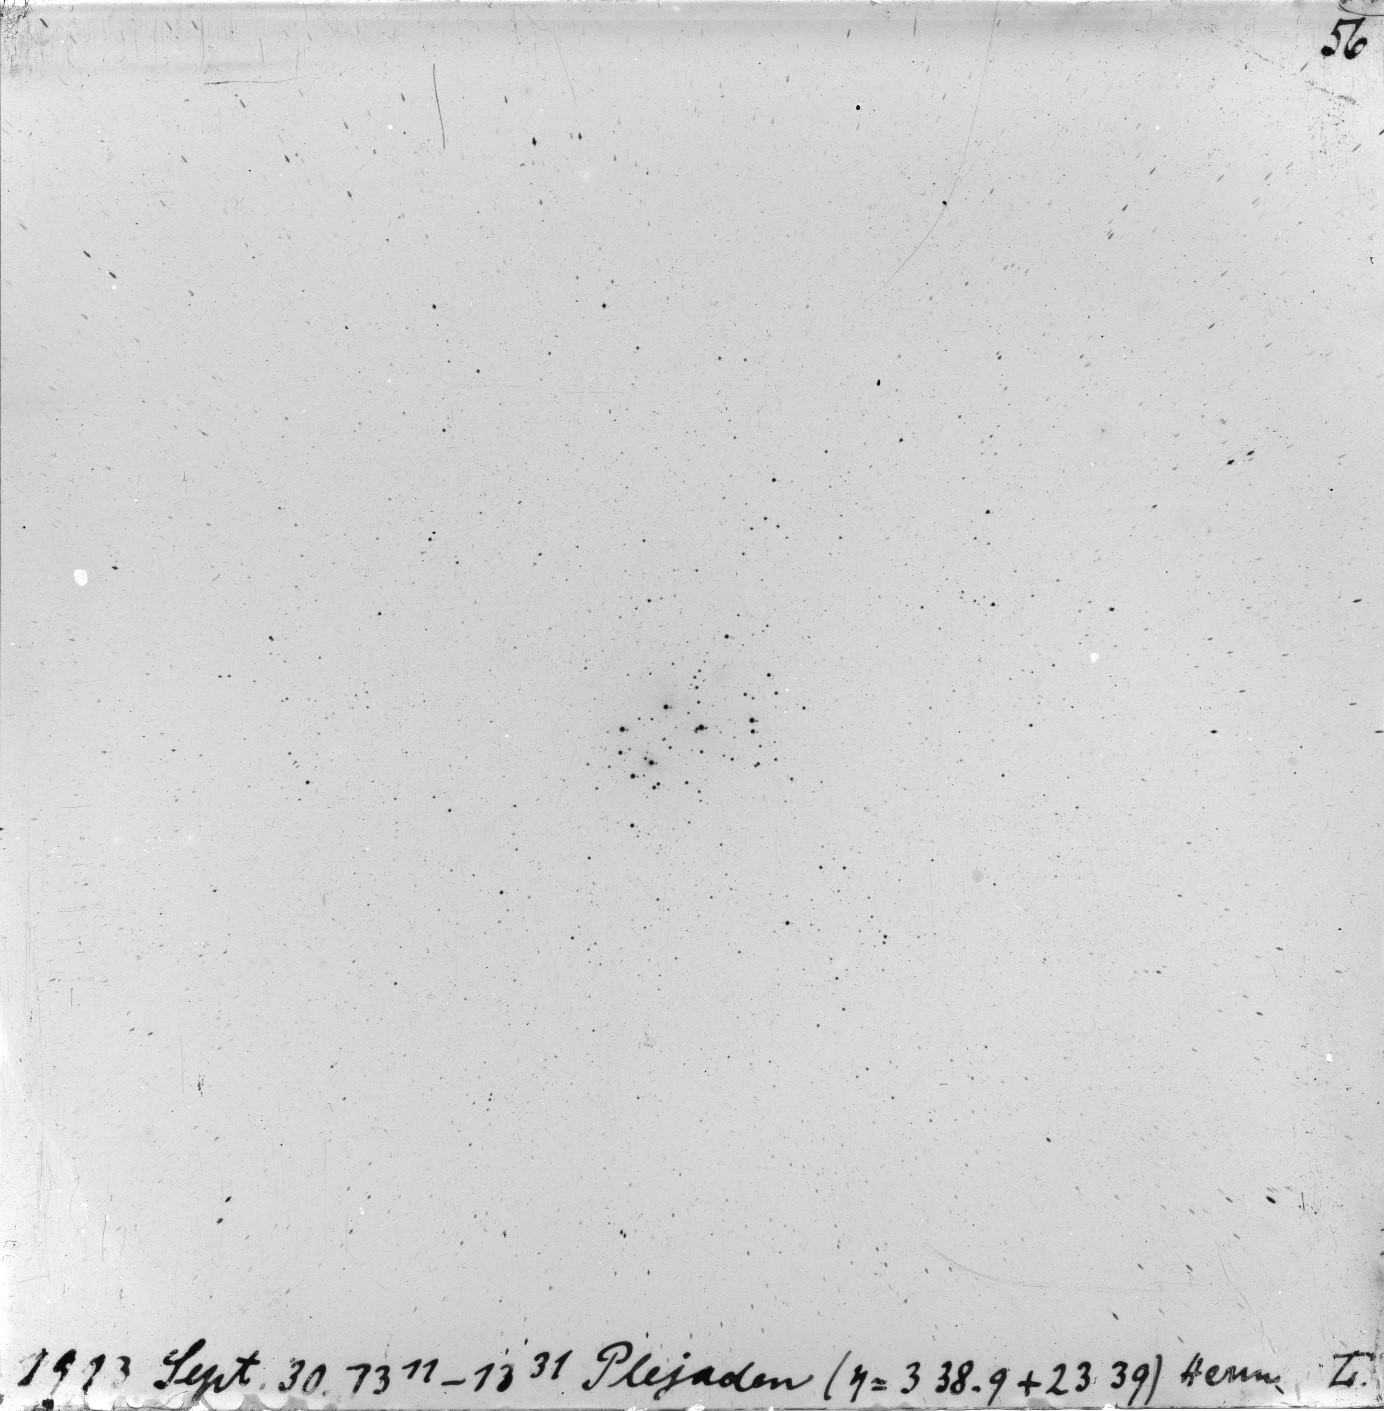 Photographic plate (the Pleiades)